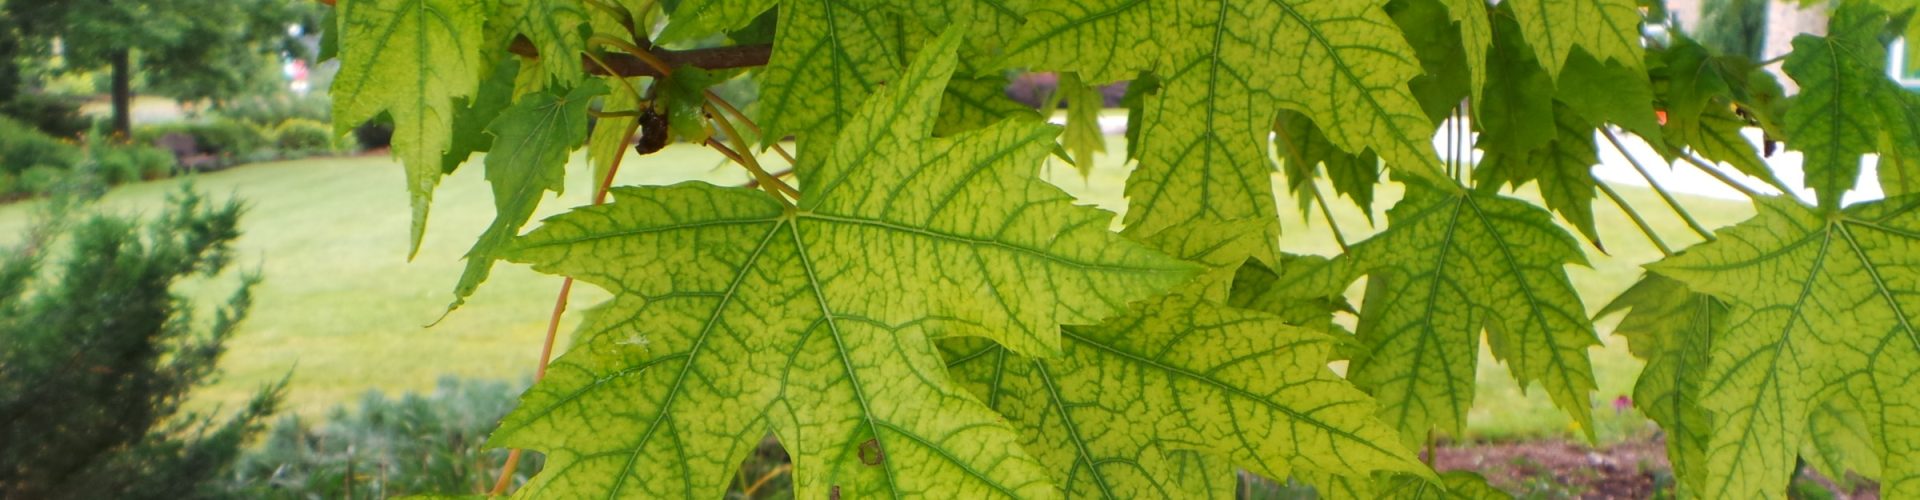 image of green leaves with yellow spots